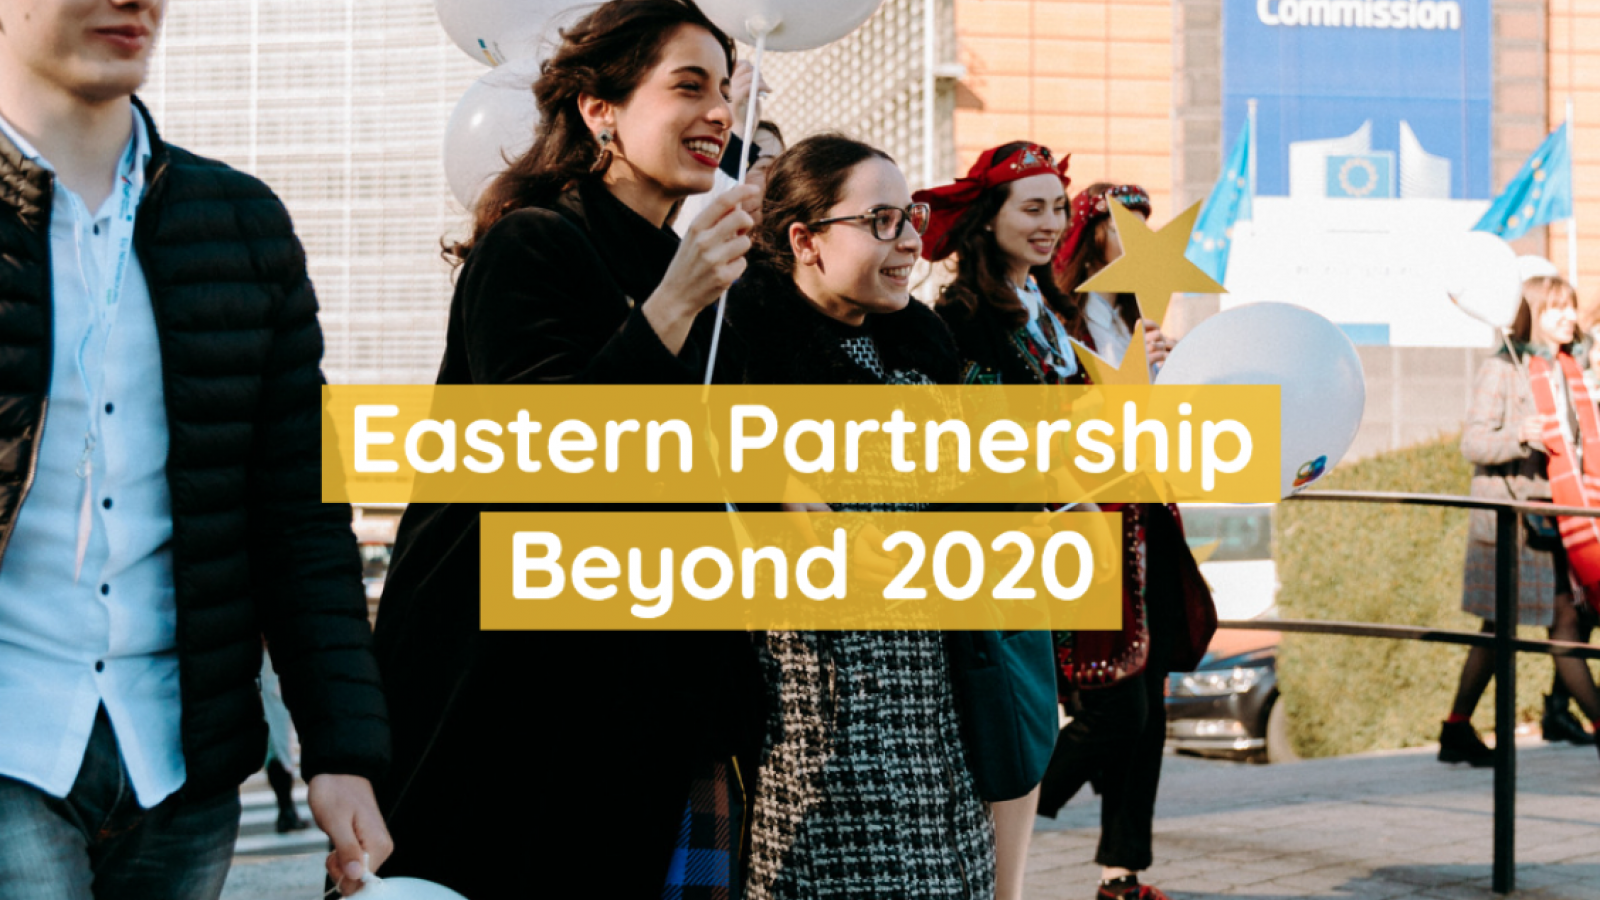 Eastern Partnership: a renewed agenda for recovery, resilience and reform underpinned by an Economic and Investment plan